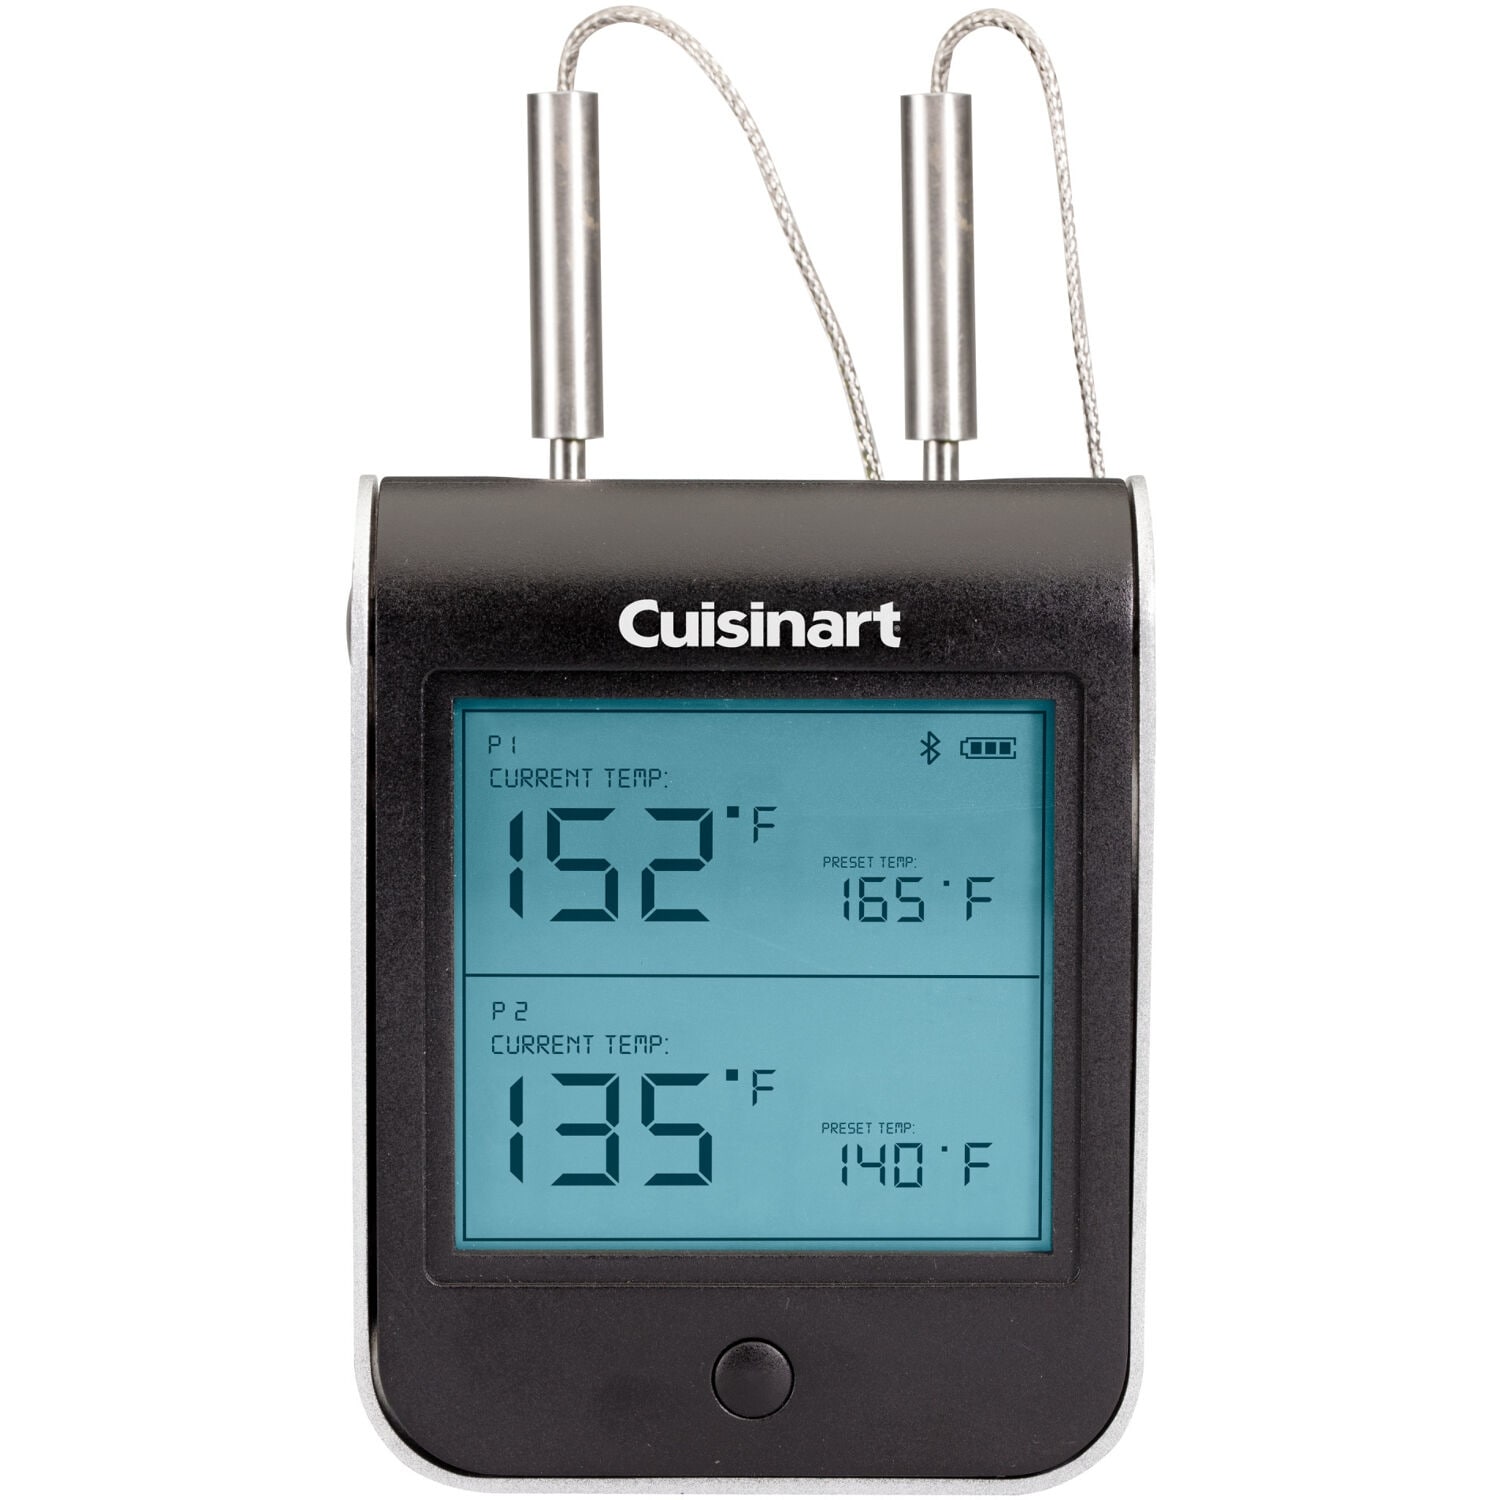 https://ak1.ostkcdn.com/images/products/is/images/direct/d13c8dcaa0f887e1db10aaaf587a1a6075981663/Cuisinart-Bluetooth-Easy-Connect-Thermometer-with-2-Meat-Probes.jpg